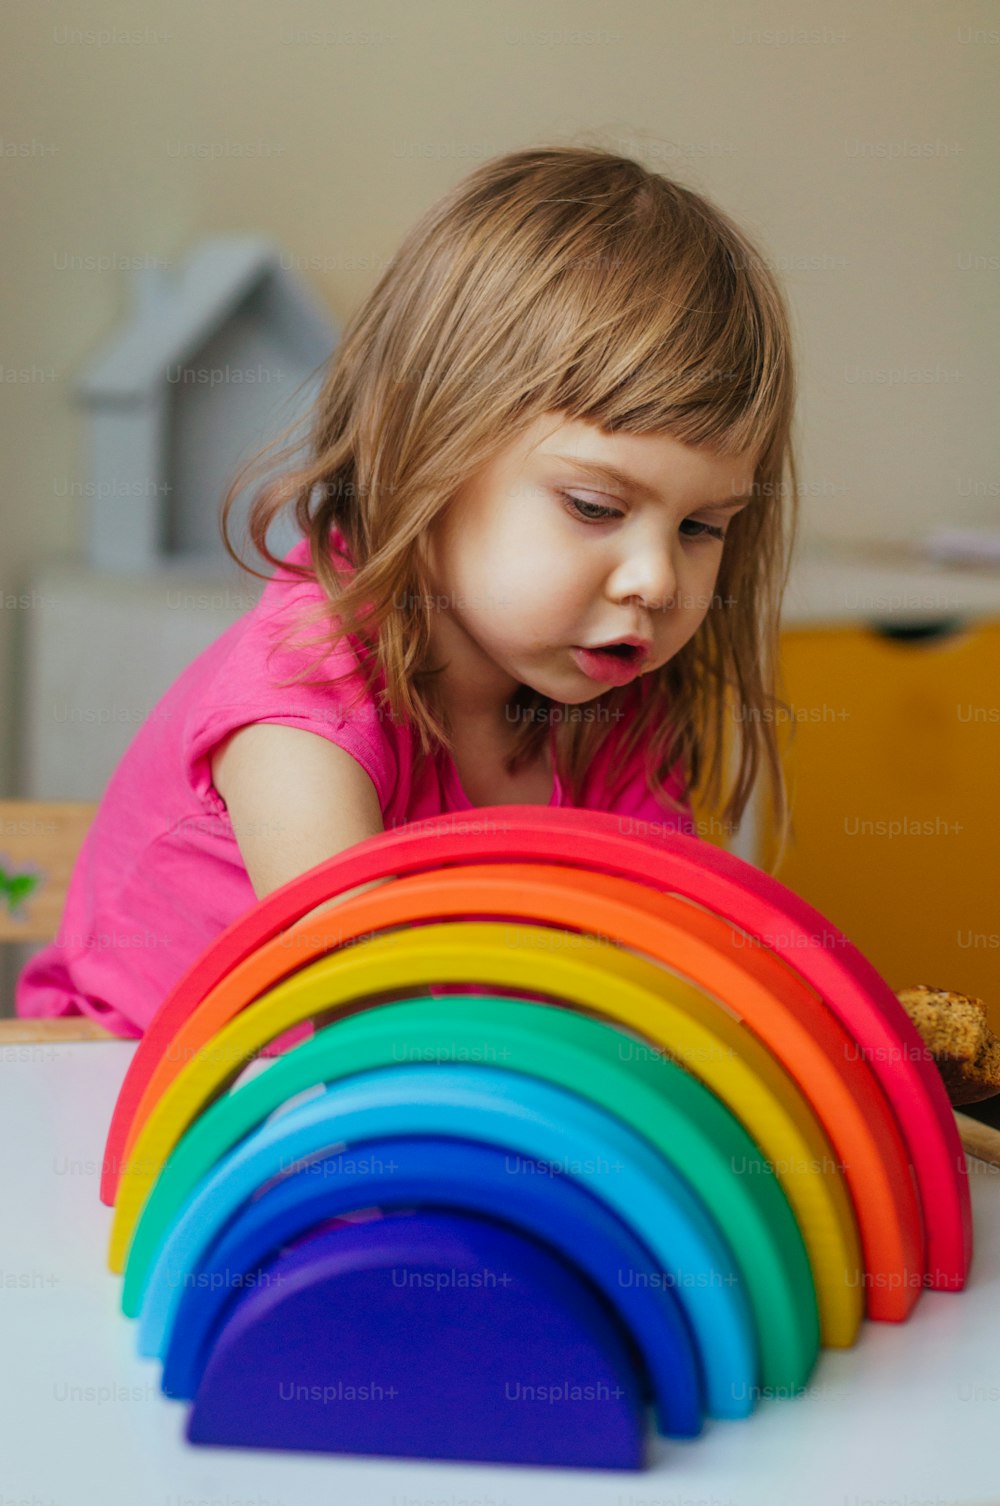 Non plastic wooden toys concept. Beautiful little girl playing with colorful wooden toy rainbow in the children room